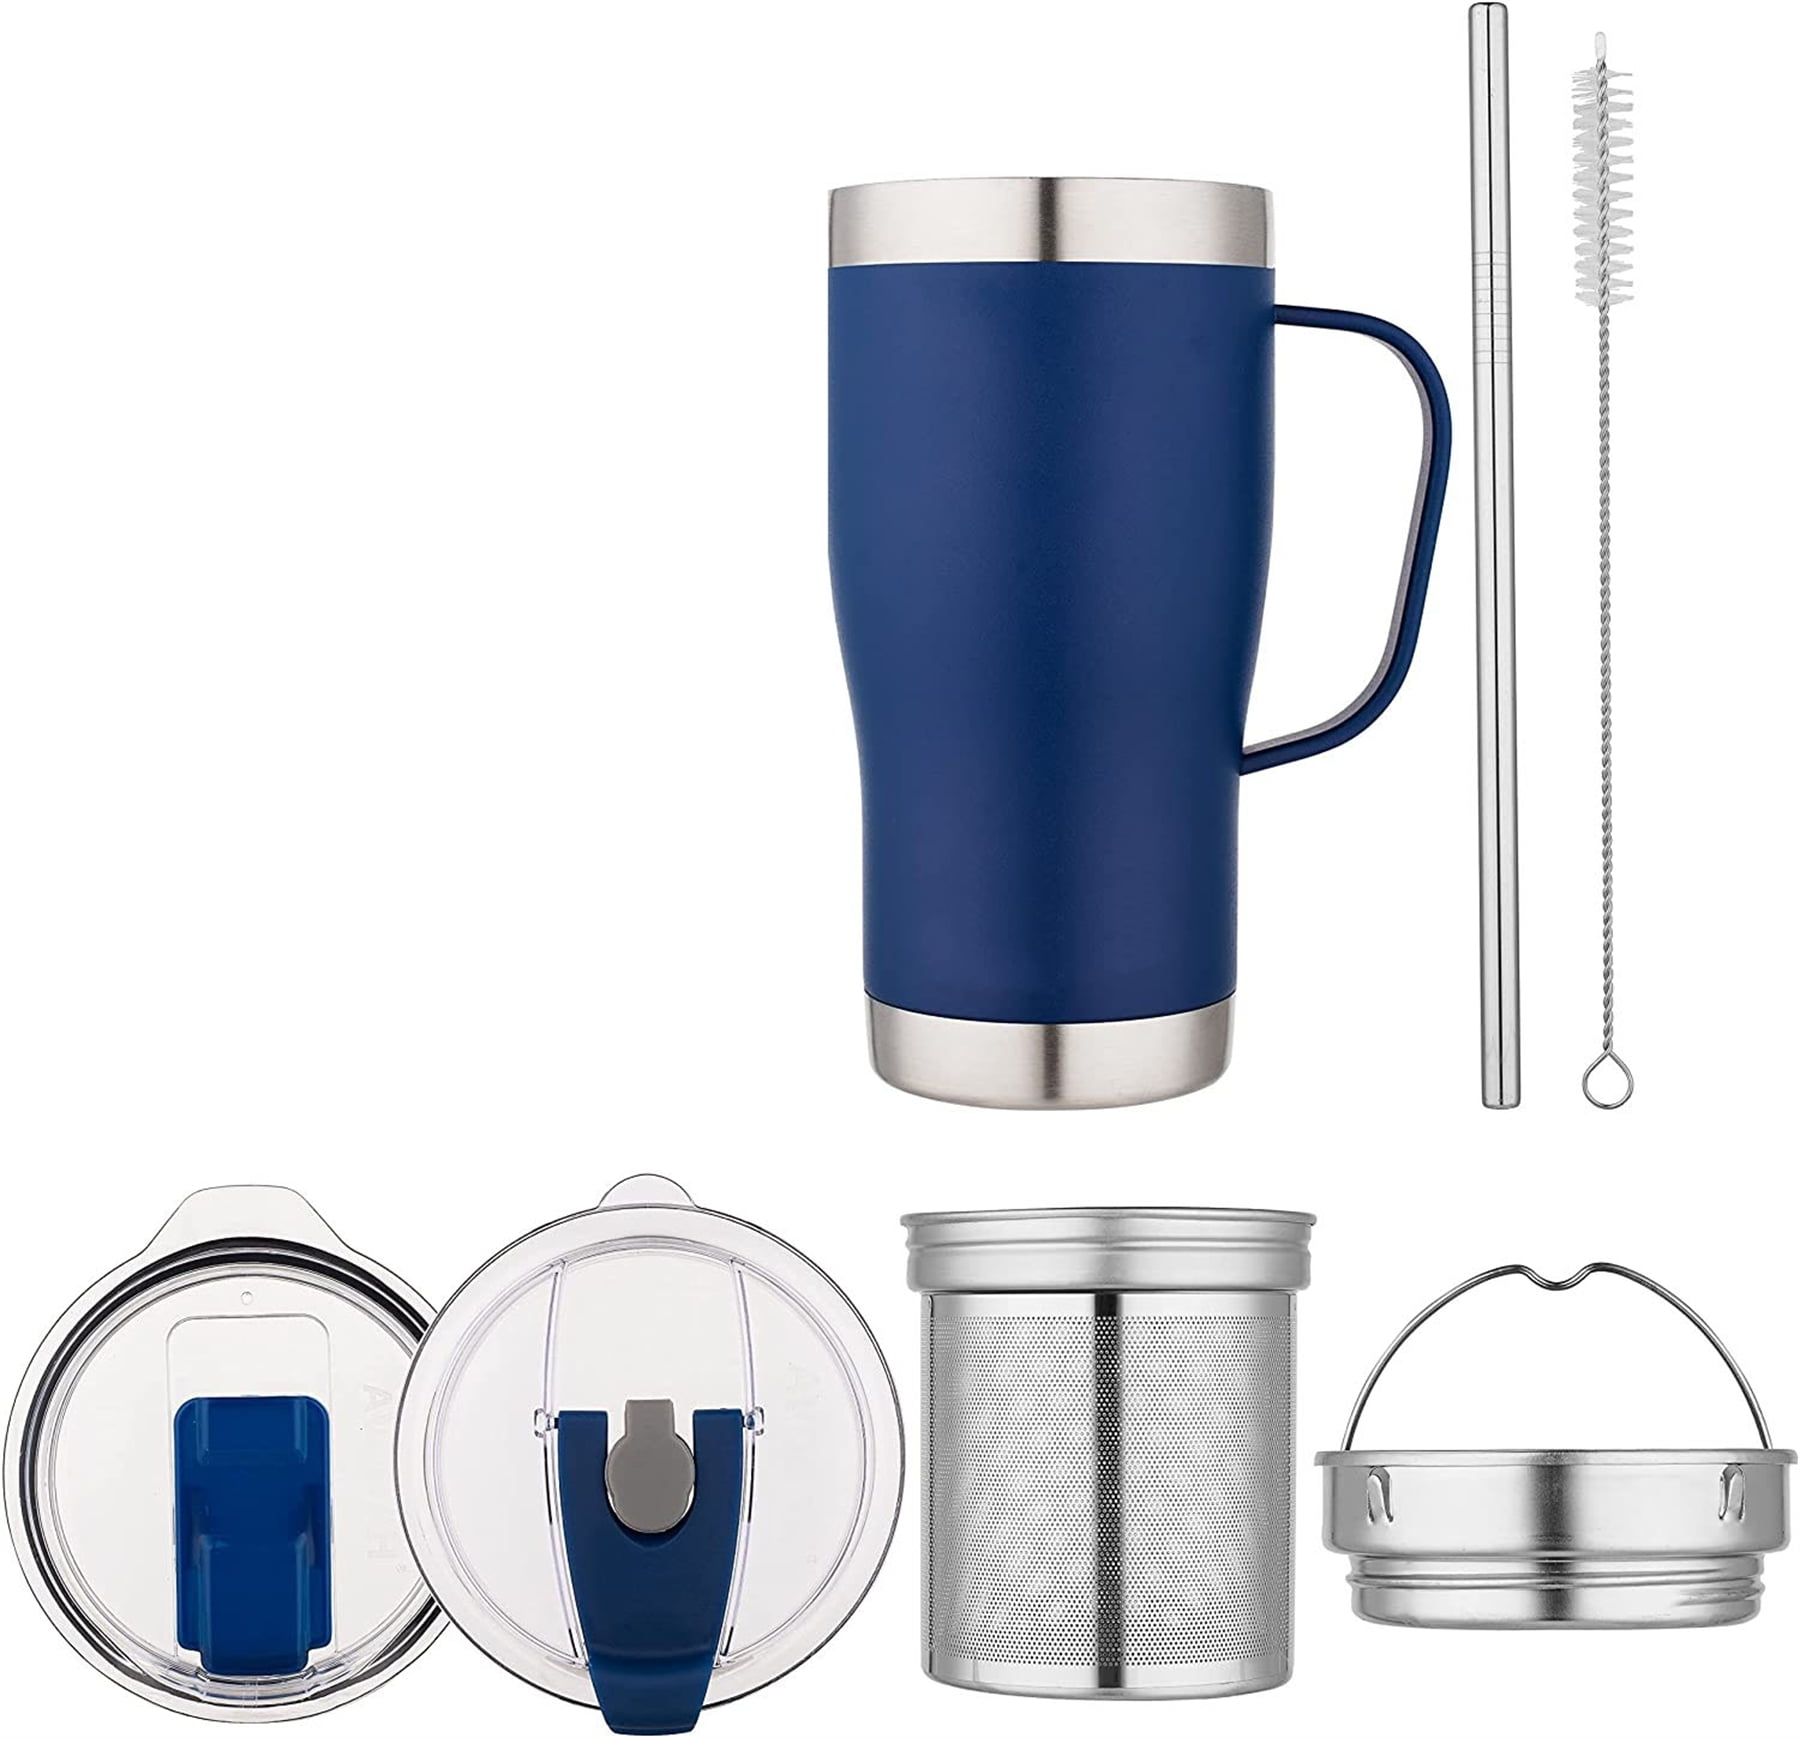  GiNT 17oz Travel Tea Mug with Infuser and Two Lids